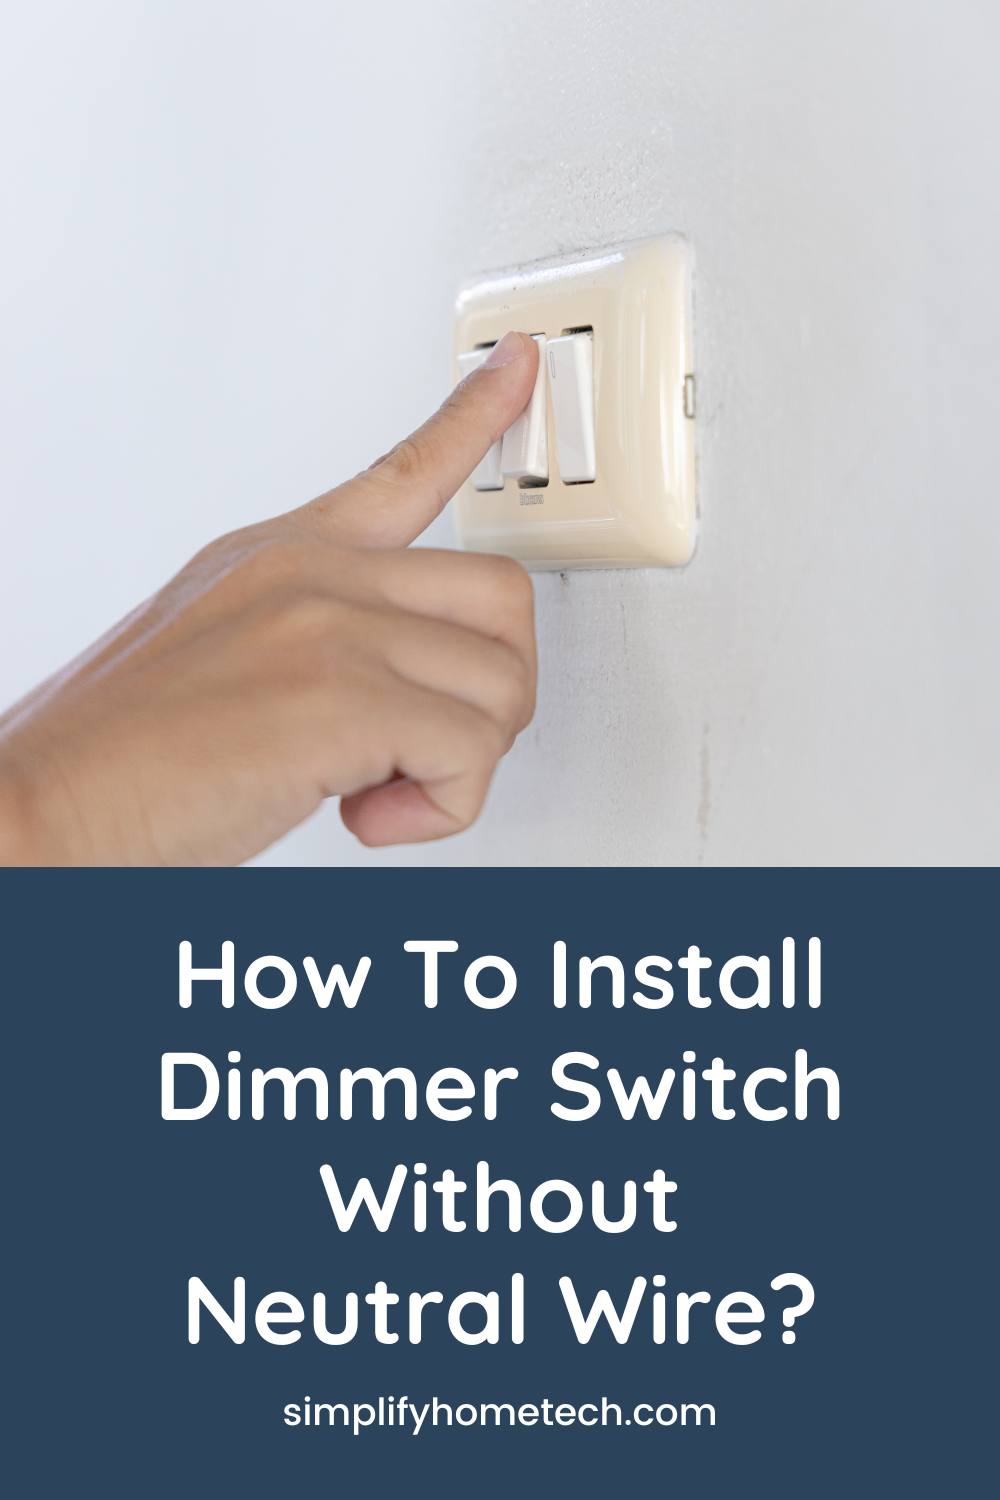 How To Install Dimmer Switch Without Neutral